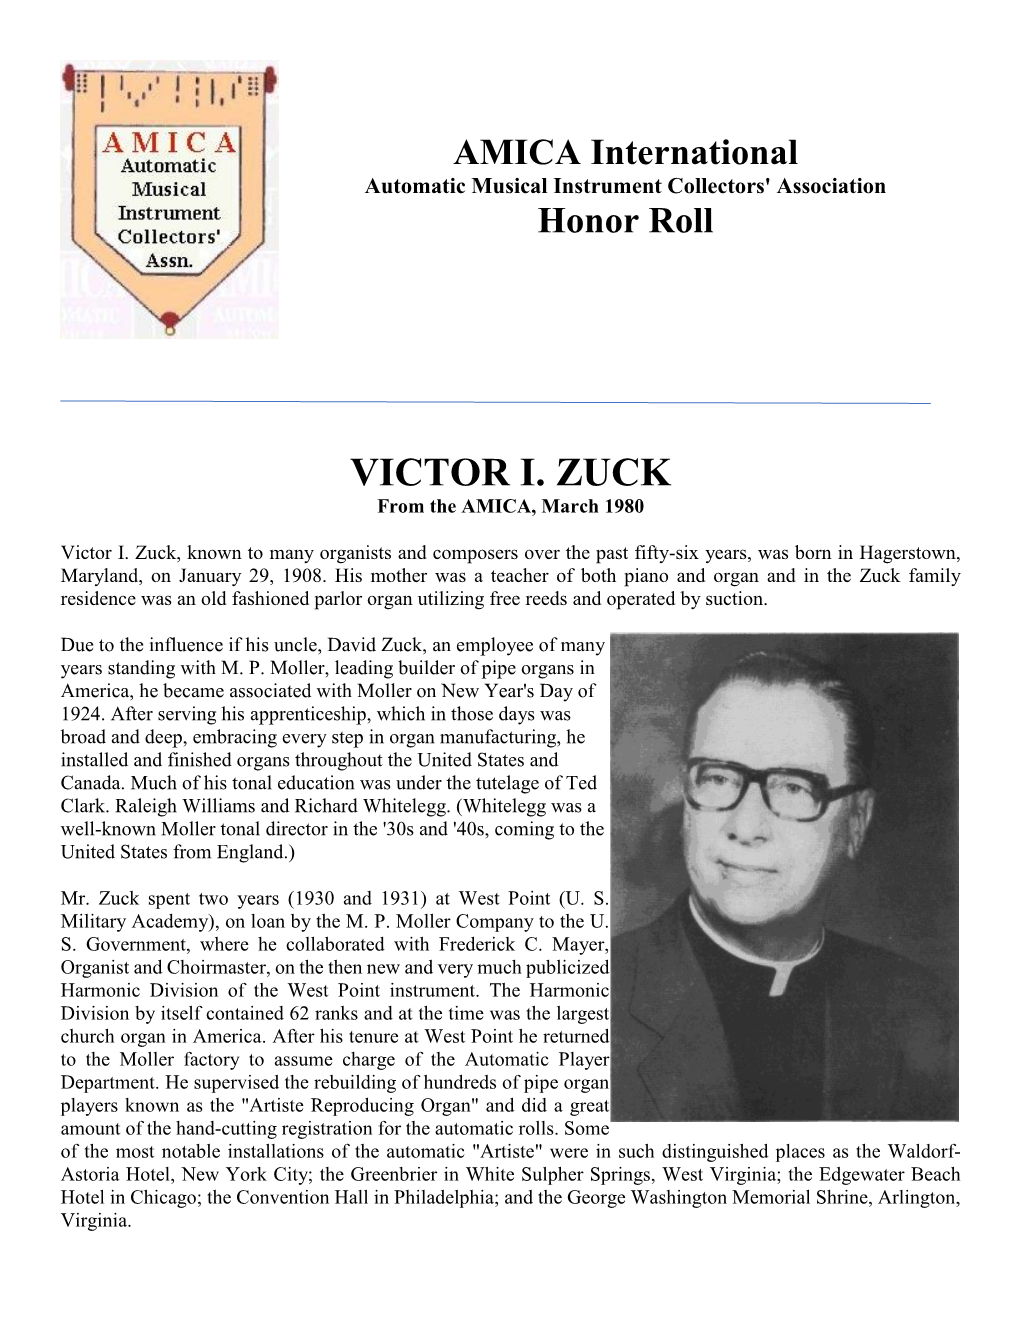 VICTOR I. ZUCK from the AMICA, March 1980